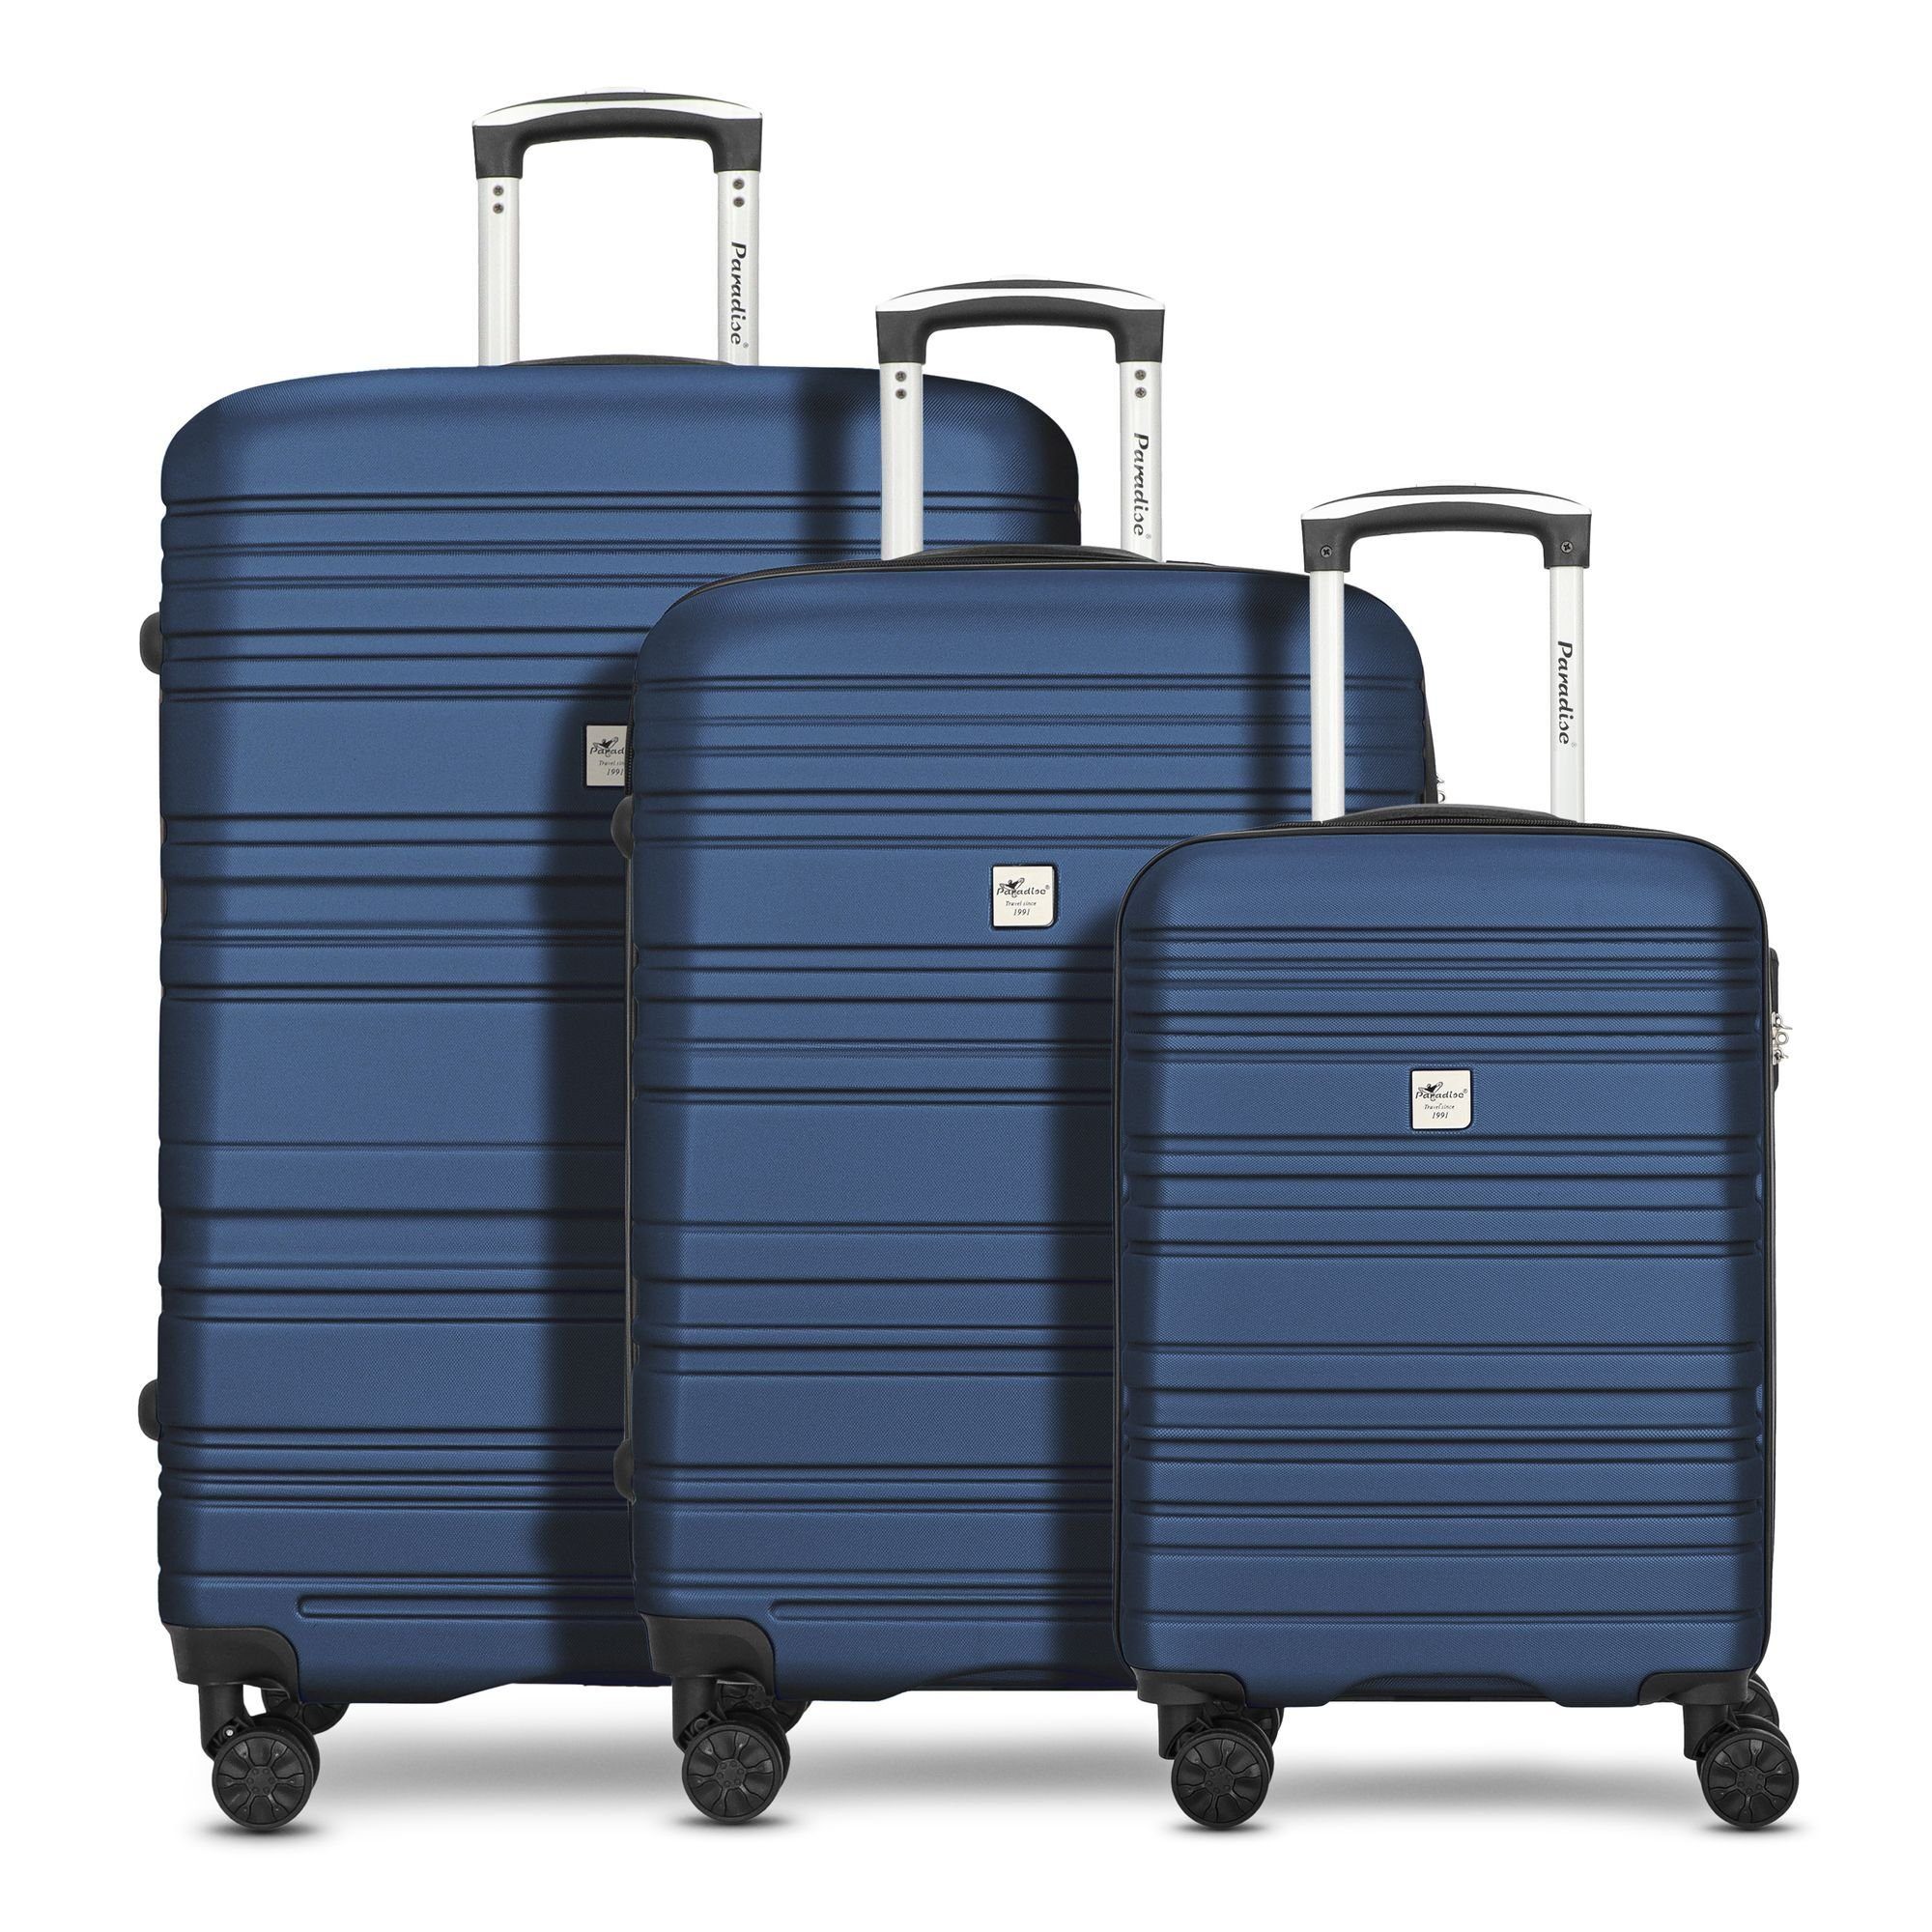 CHECK.IN® ABS Rollen, Paradise, 3 (3-teilig, Trolleyset 4 tlg), blue